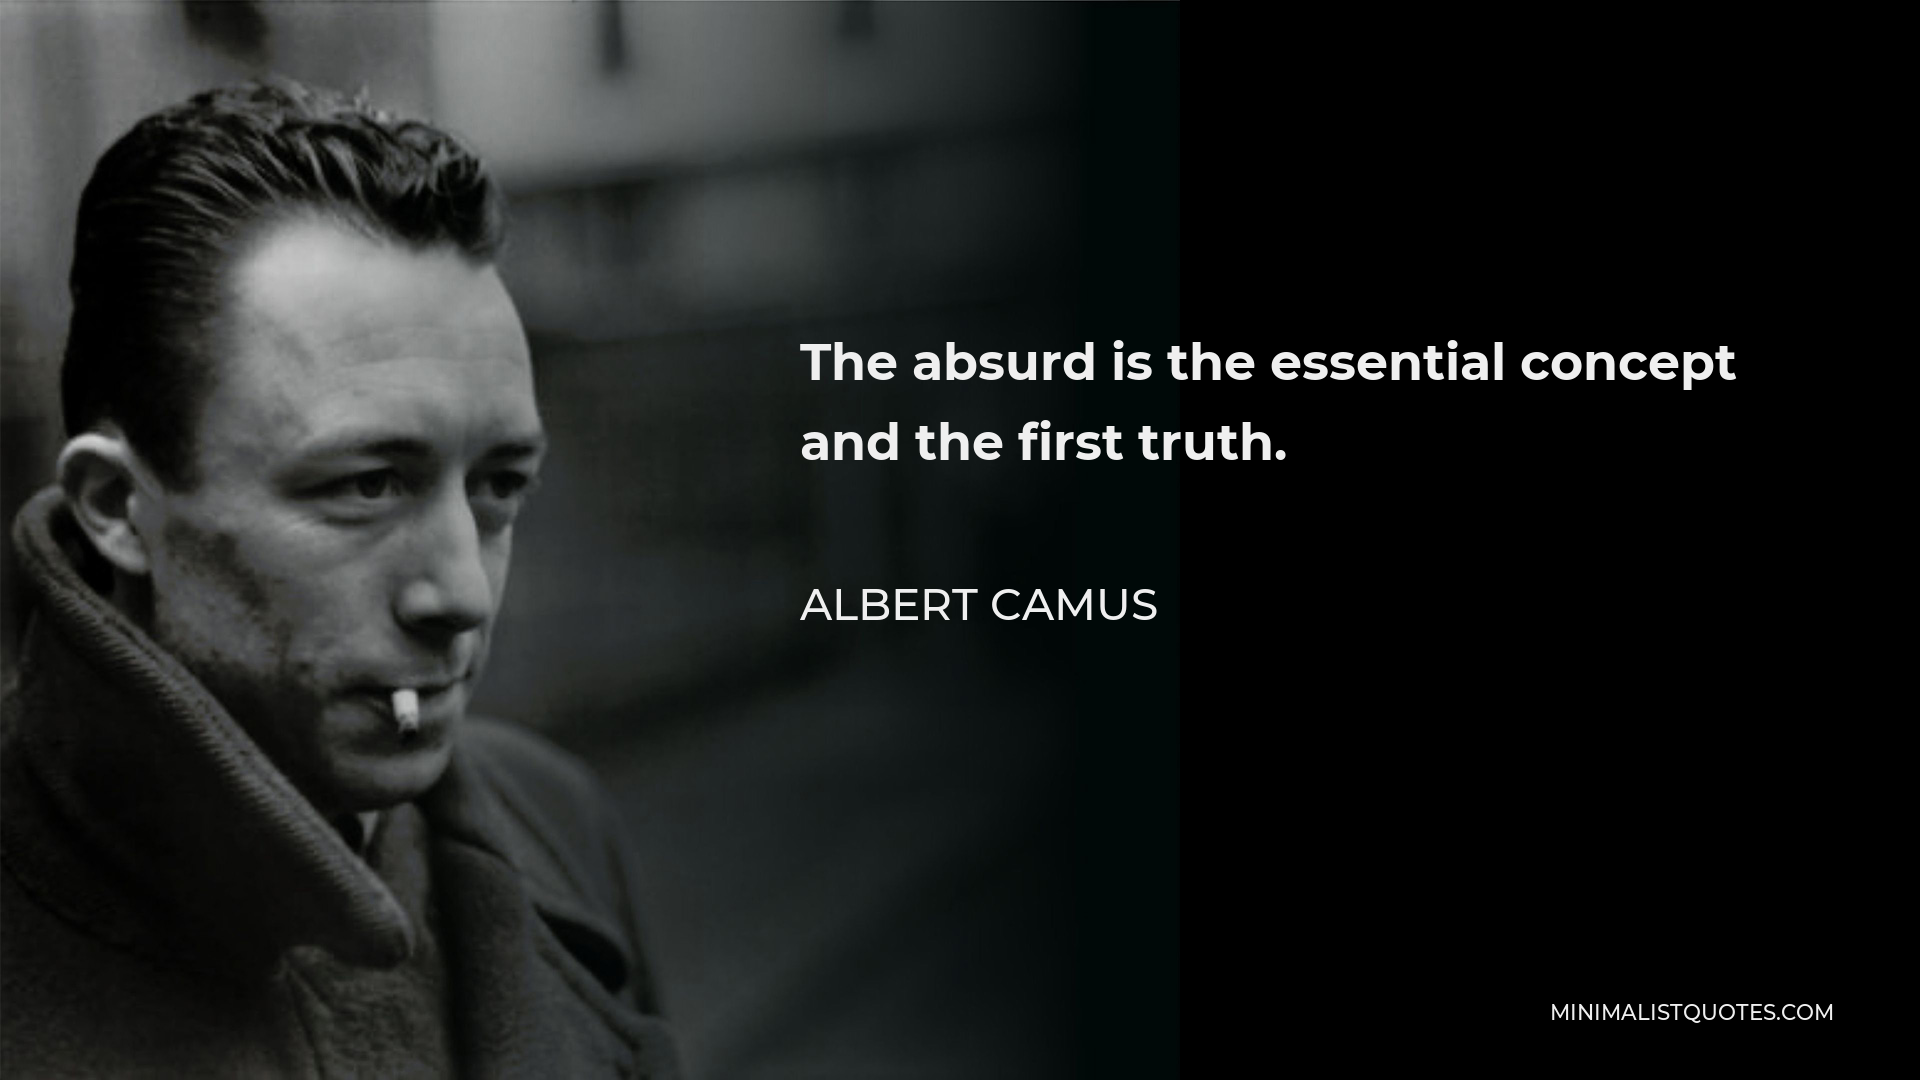 Albert Camus Quote - The absurd is the essential concept and the first truth.